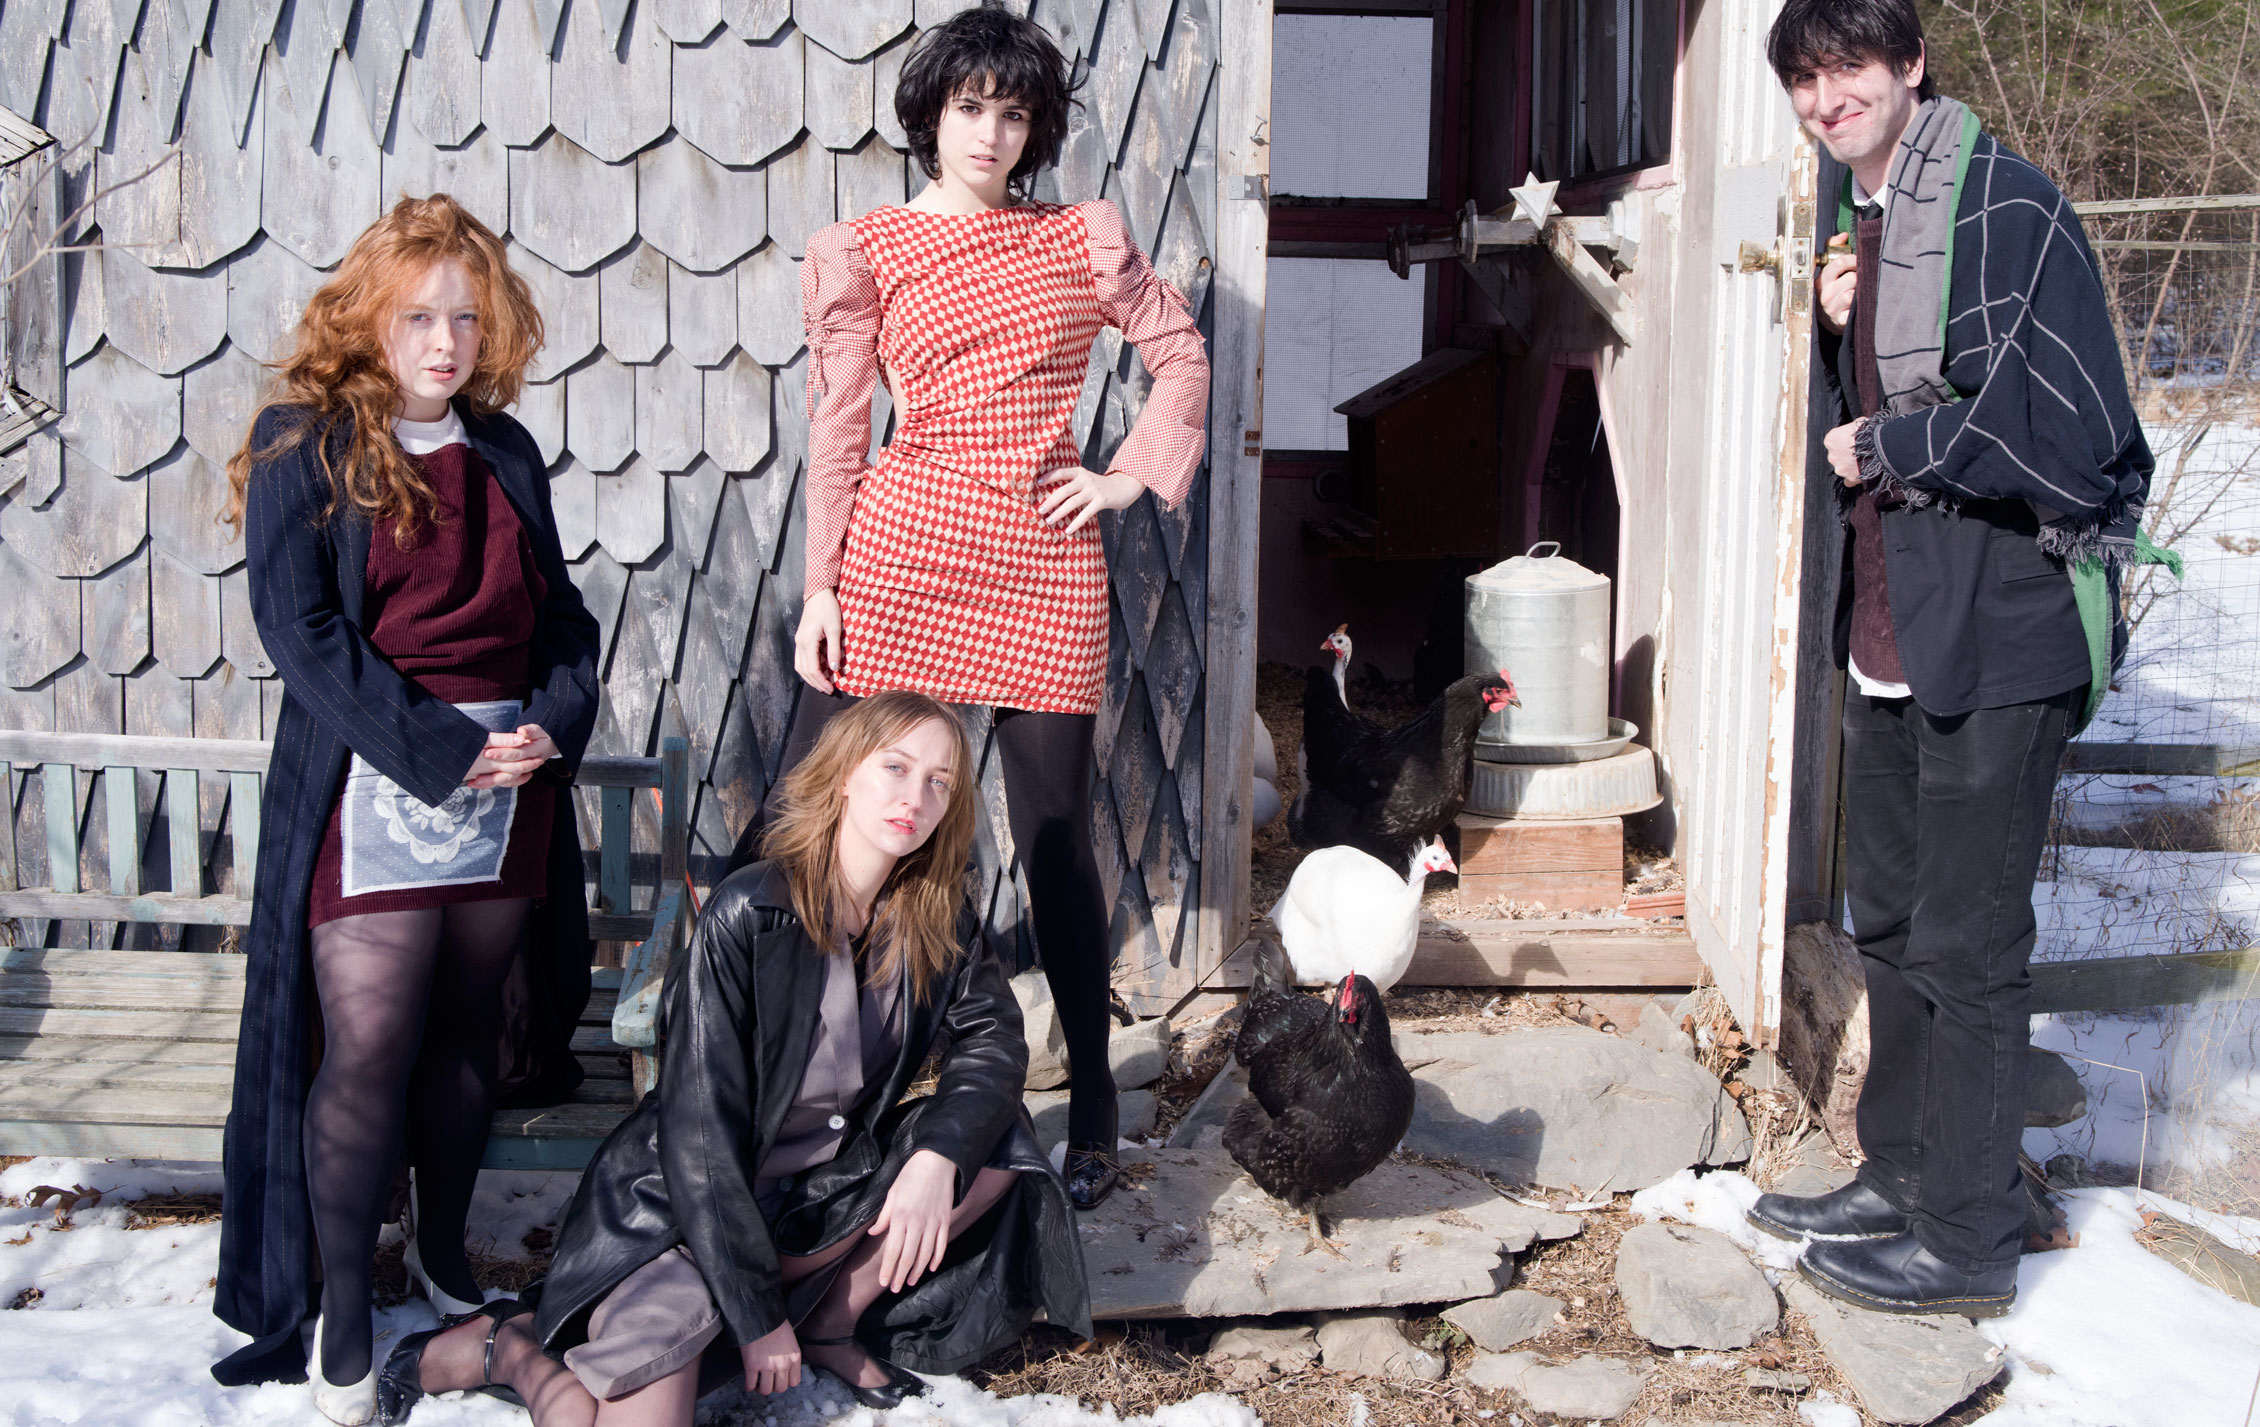 The Zhe Zhe cast ditches the city for Dana Hoey’s upstate farm. Fowl followed. From left: Ruby McCollister, Emily Allan Leah Hennessey and E.J. O’Hara.